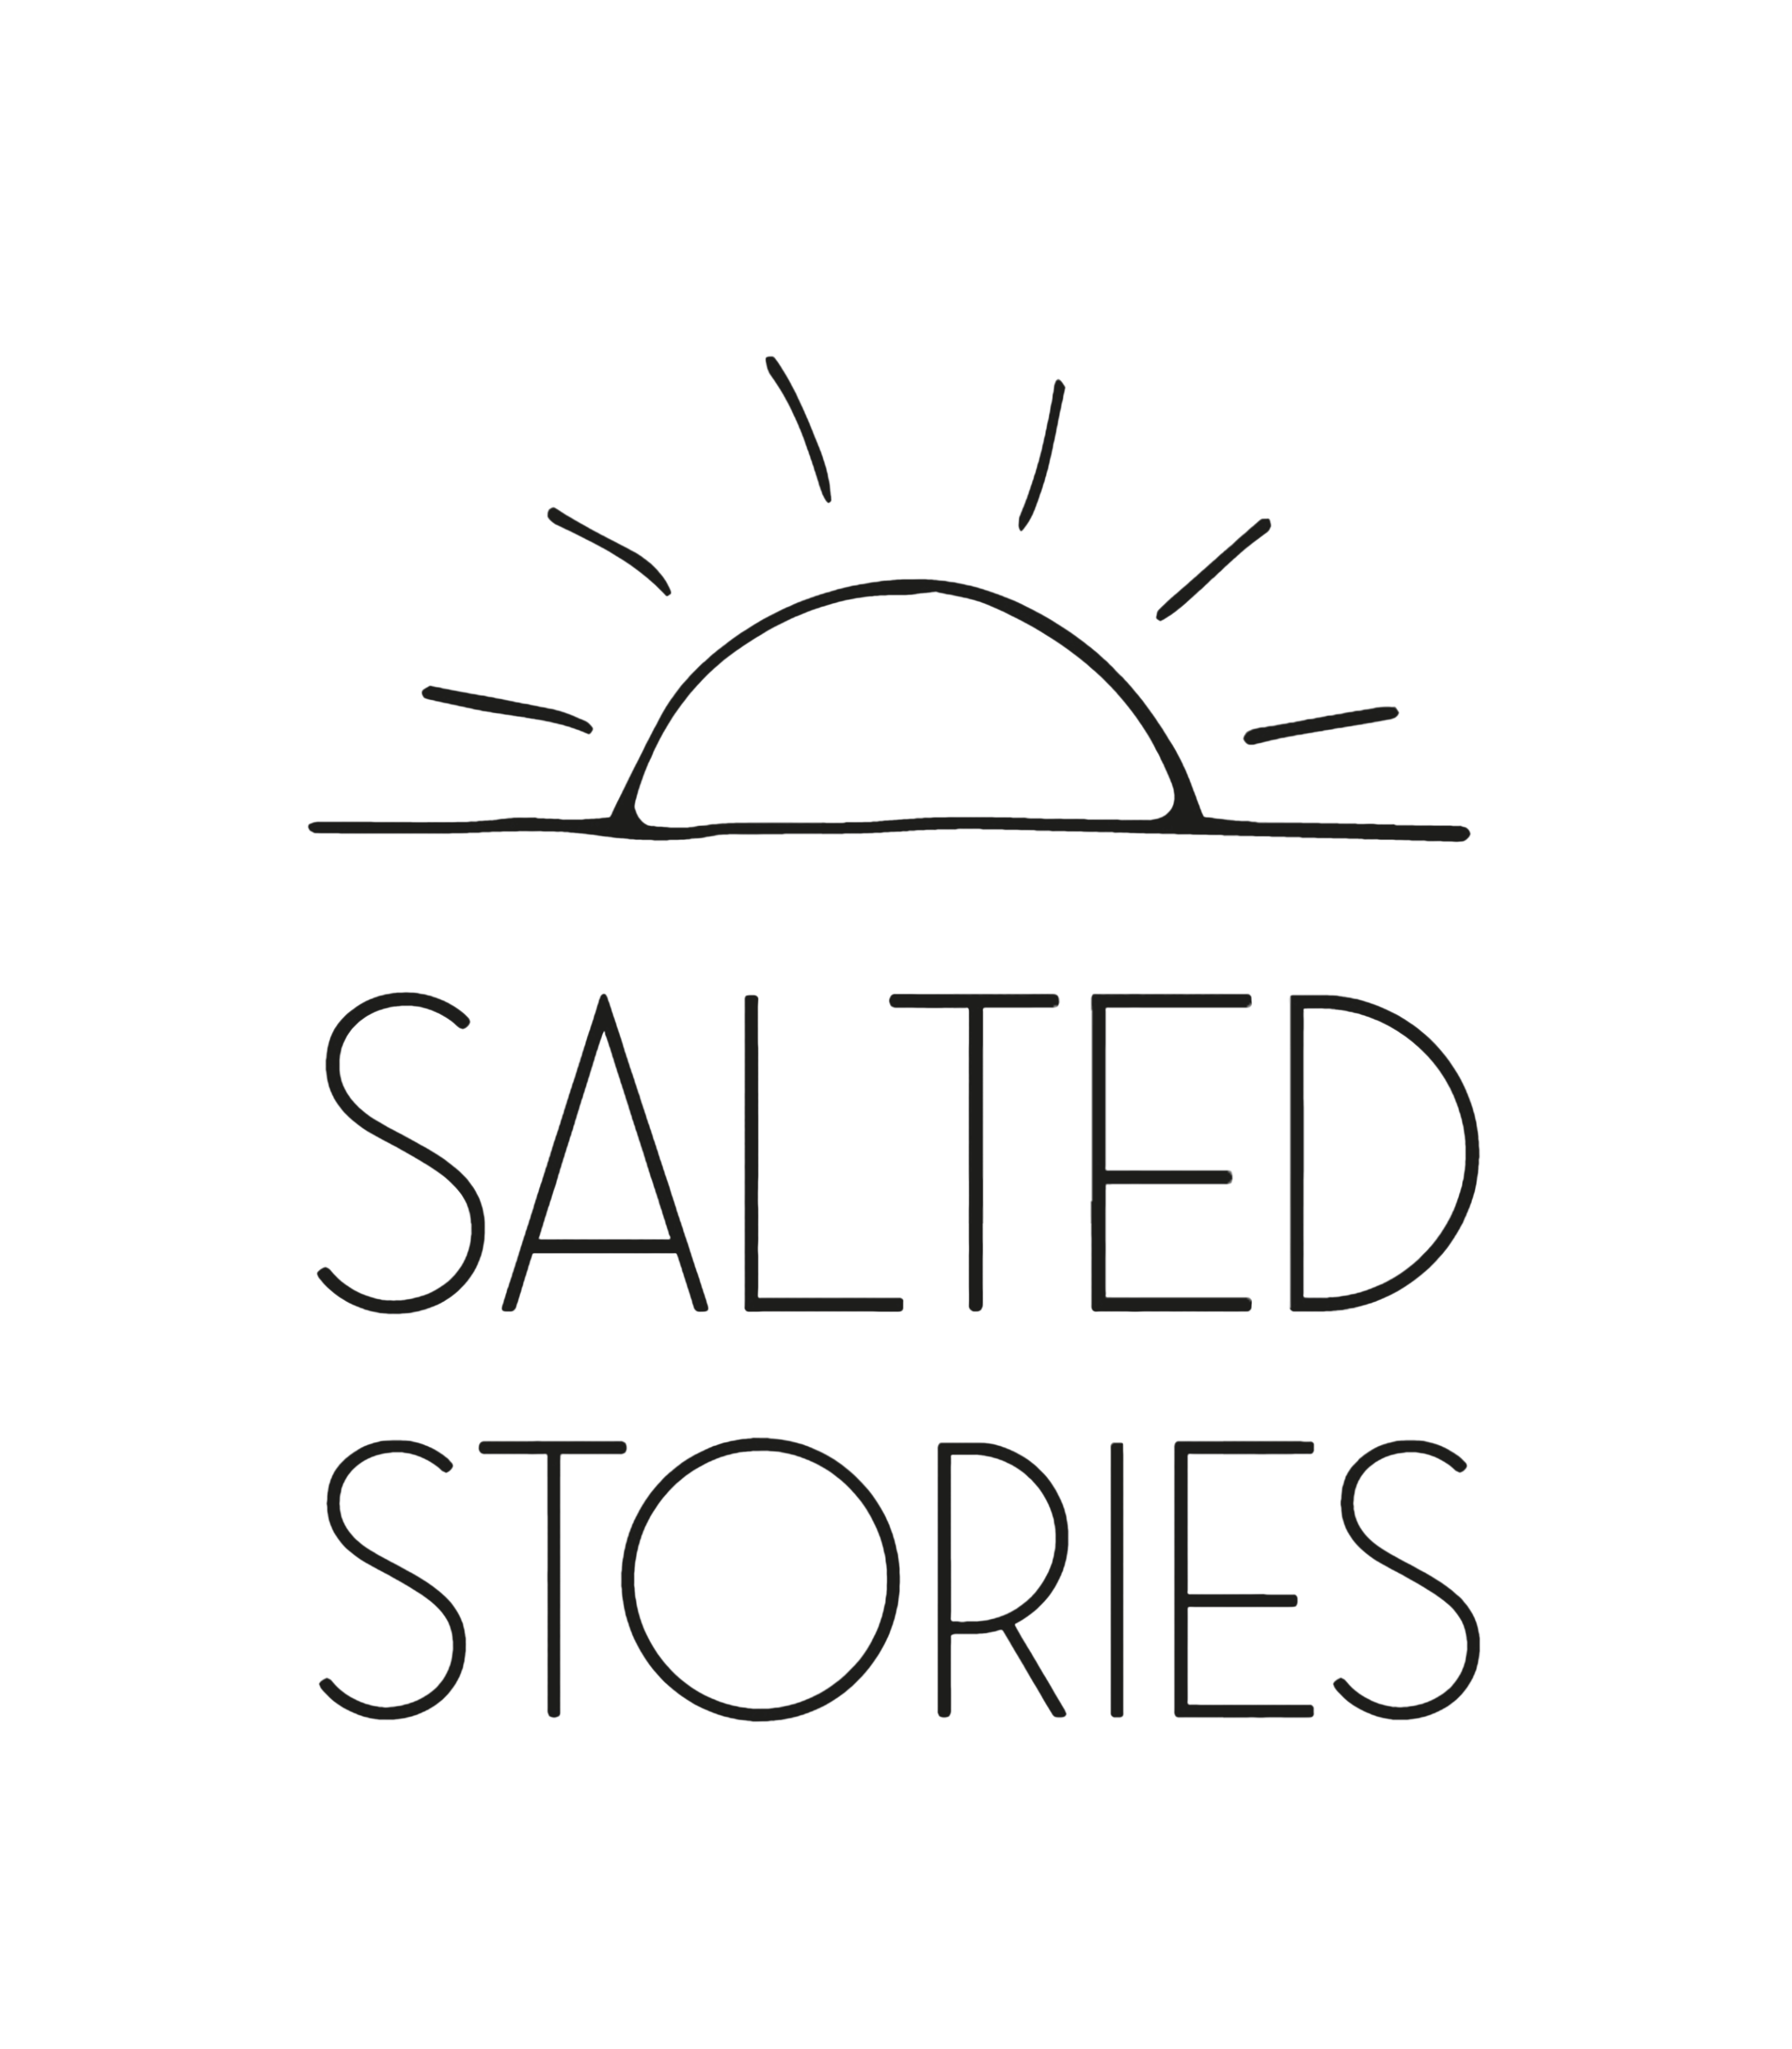 Salted Stories